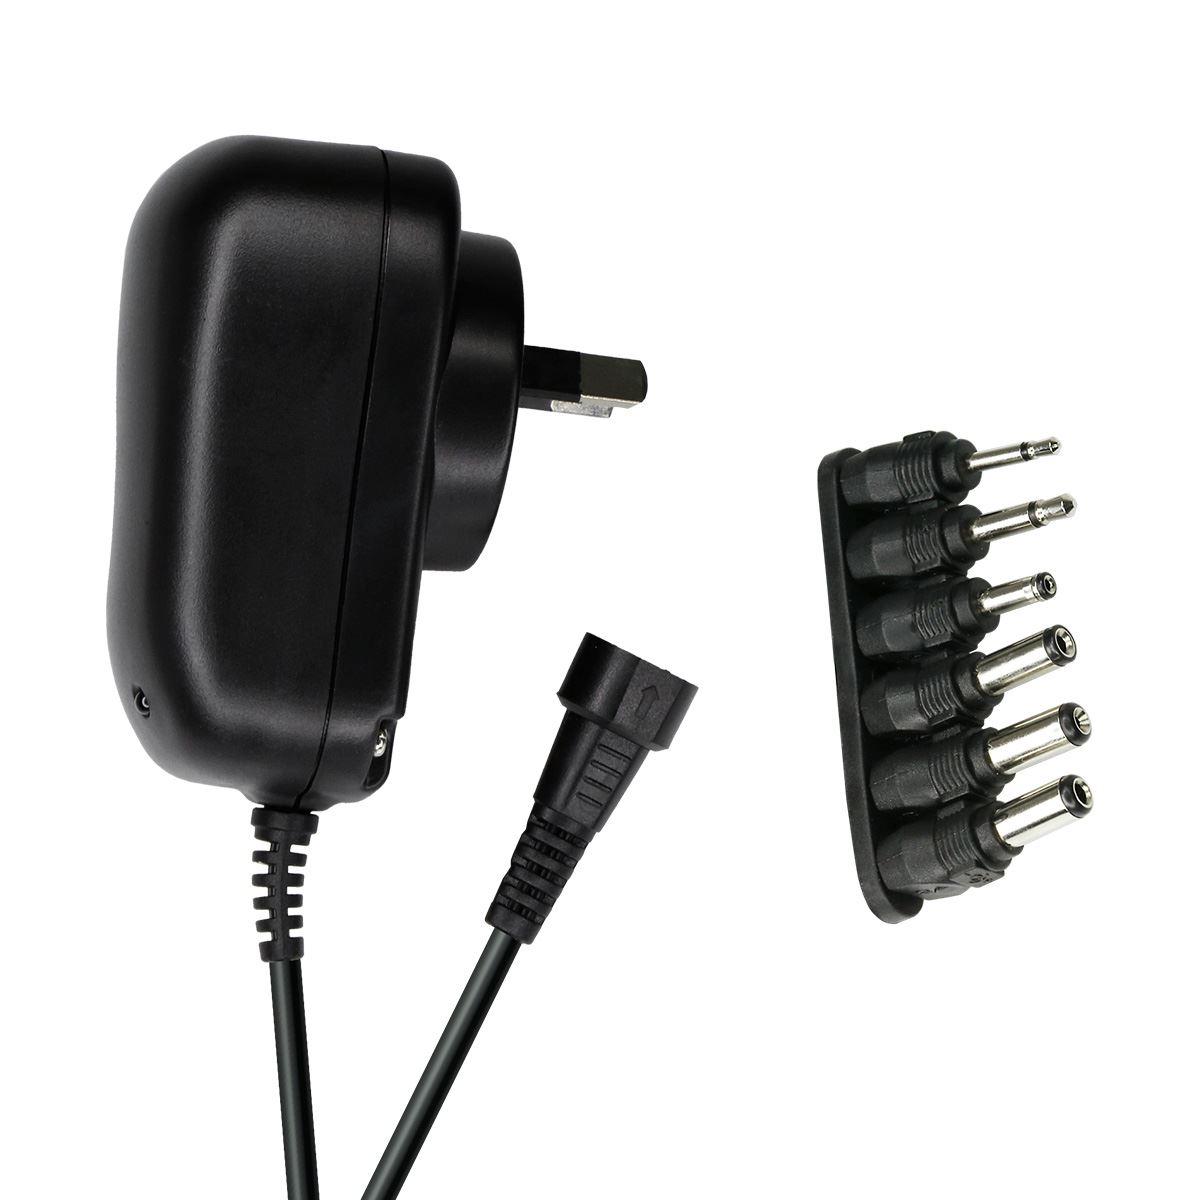 DYNAMIX Universal AC/DC Power Adapter with 6x Detachable